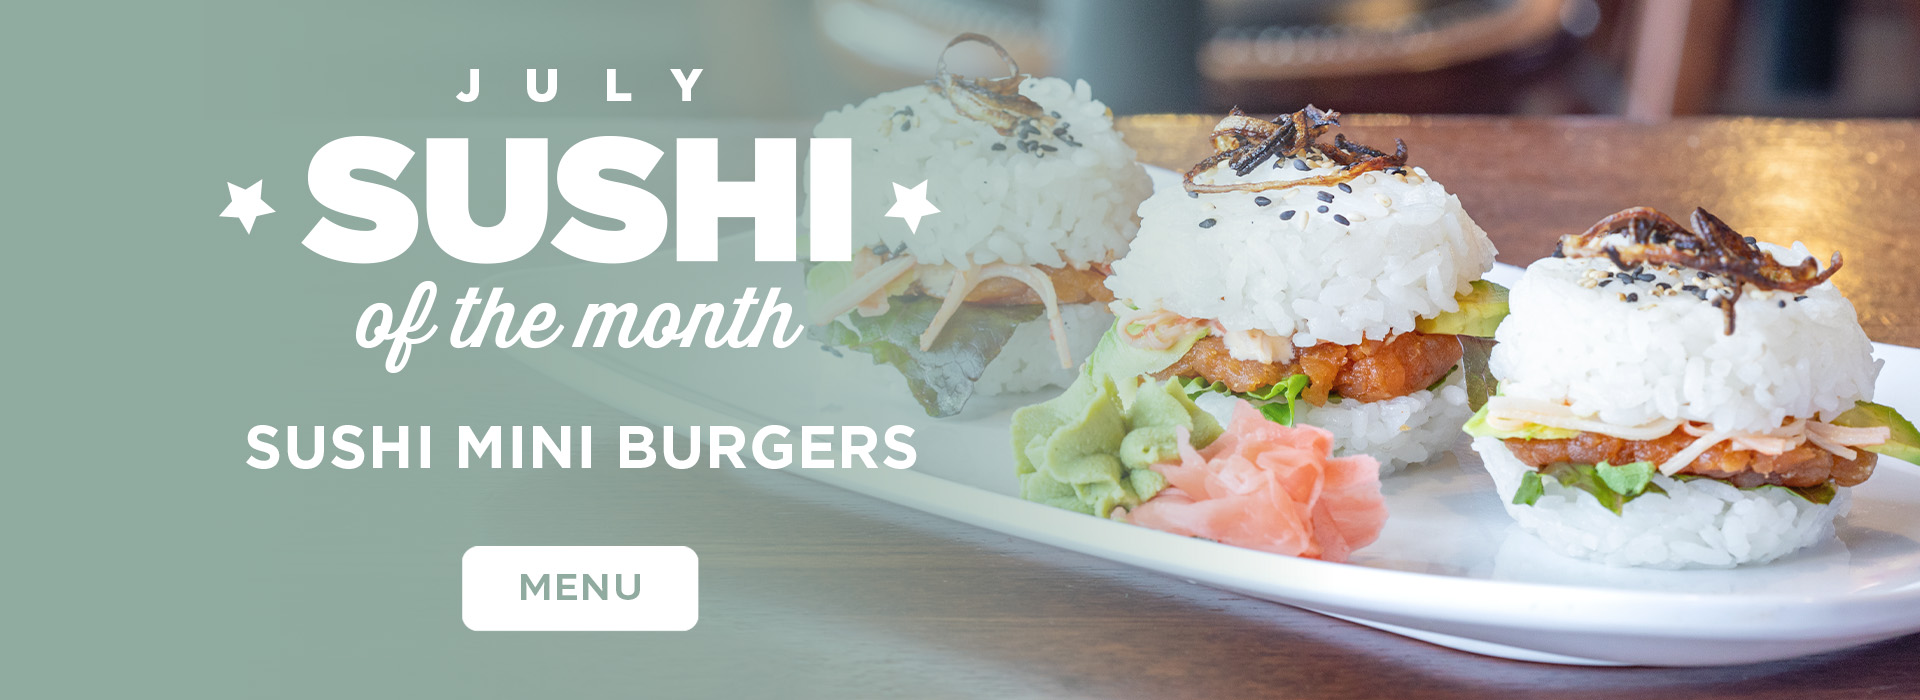 Click or tap here to view our sushi of the month!